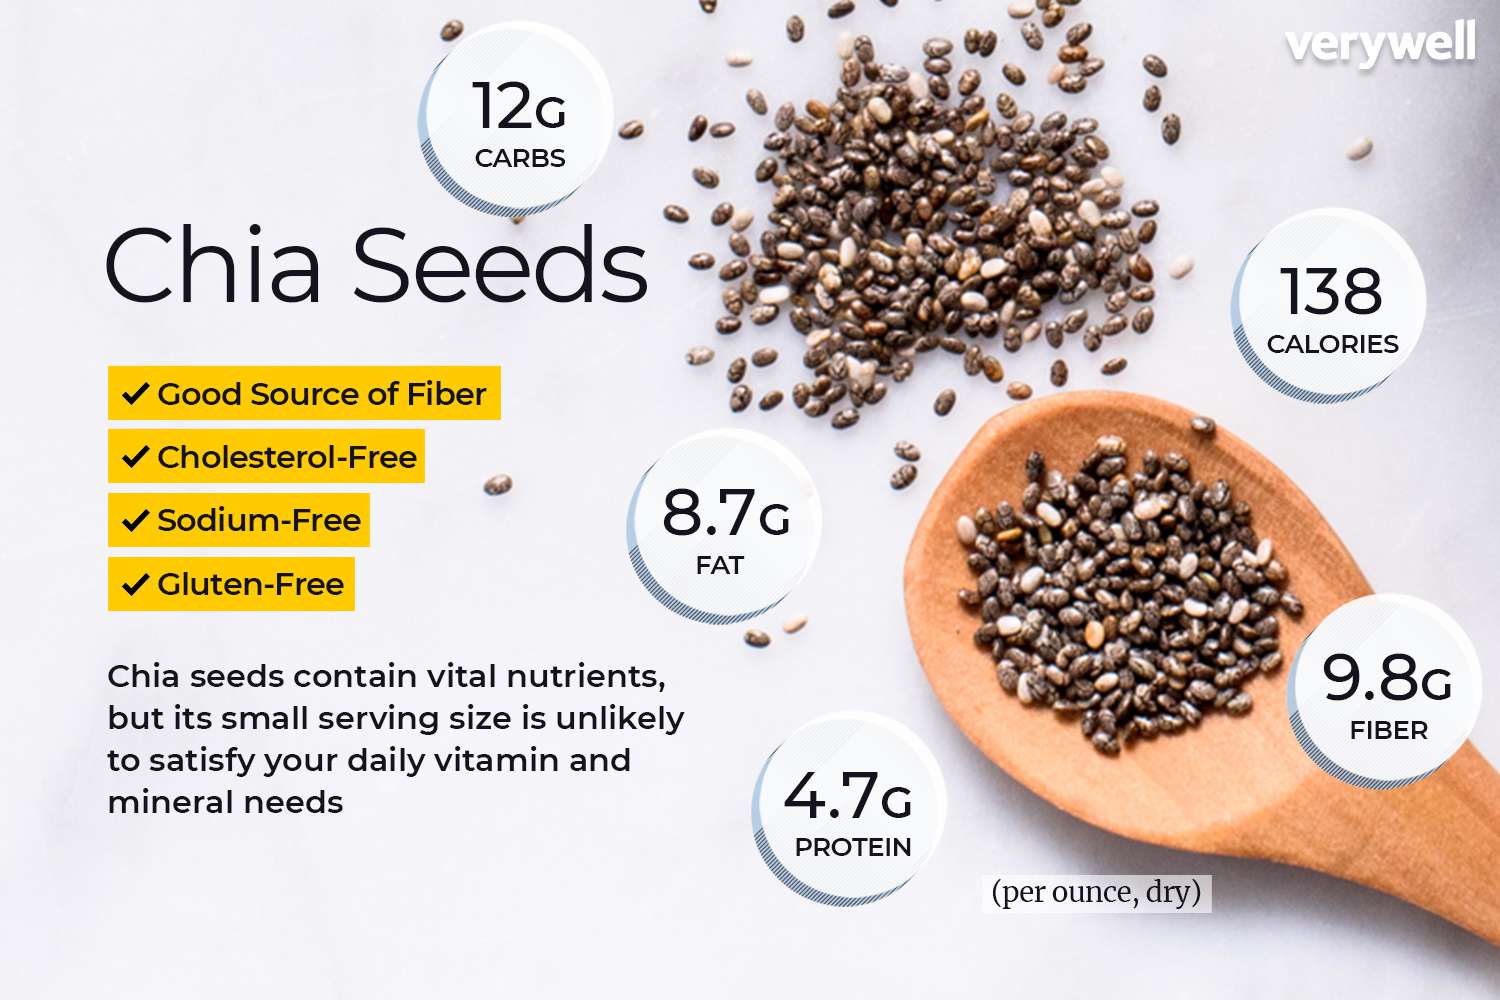 chia-seeds_annotated-2f7ca595a9bd4342a8f70623be8d9985.jpg